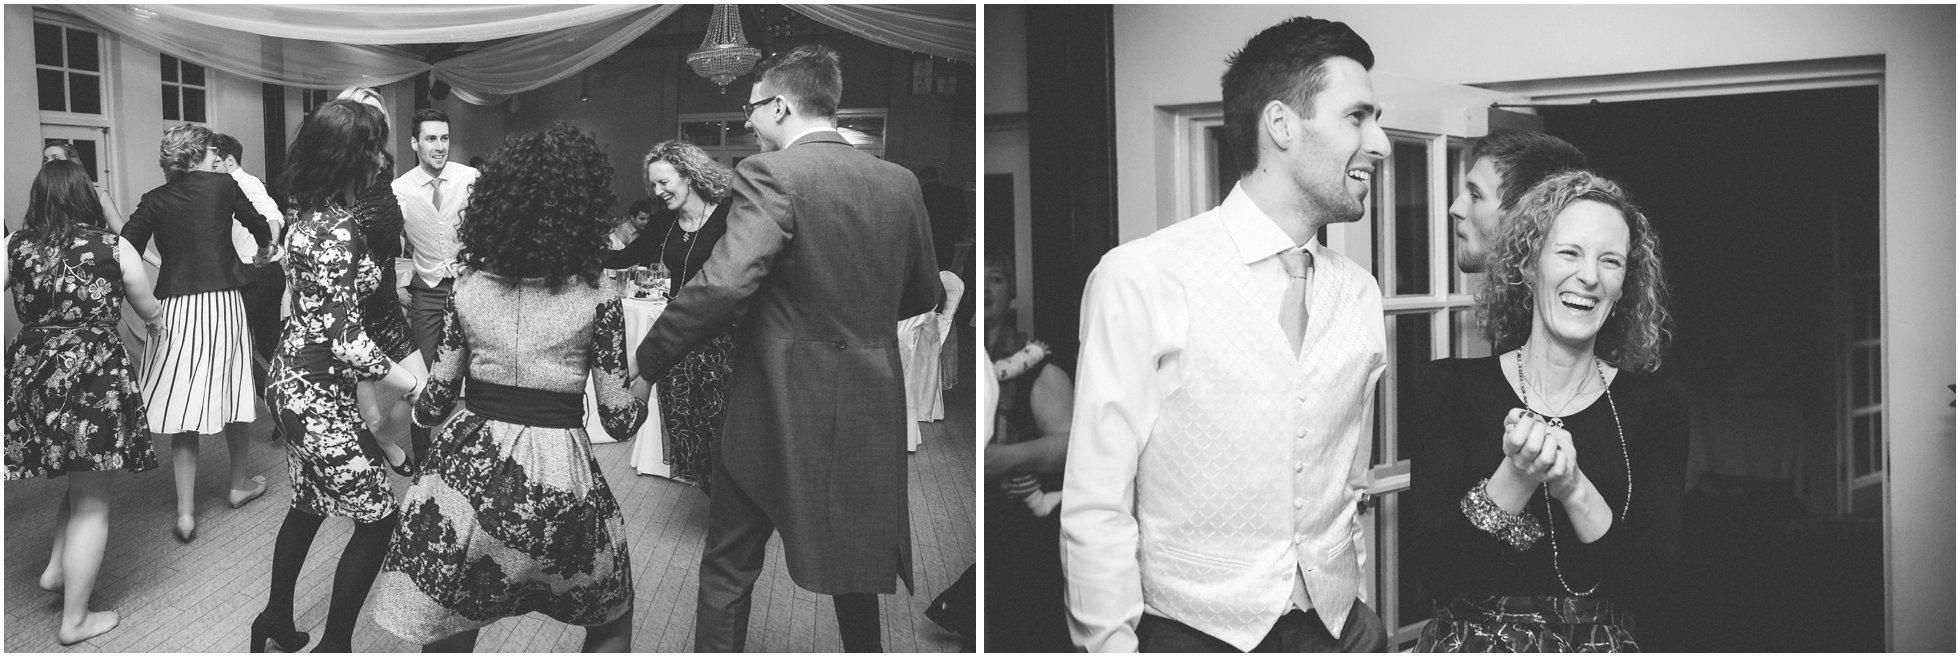 The groom dancing black and white photography